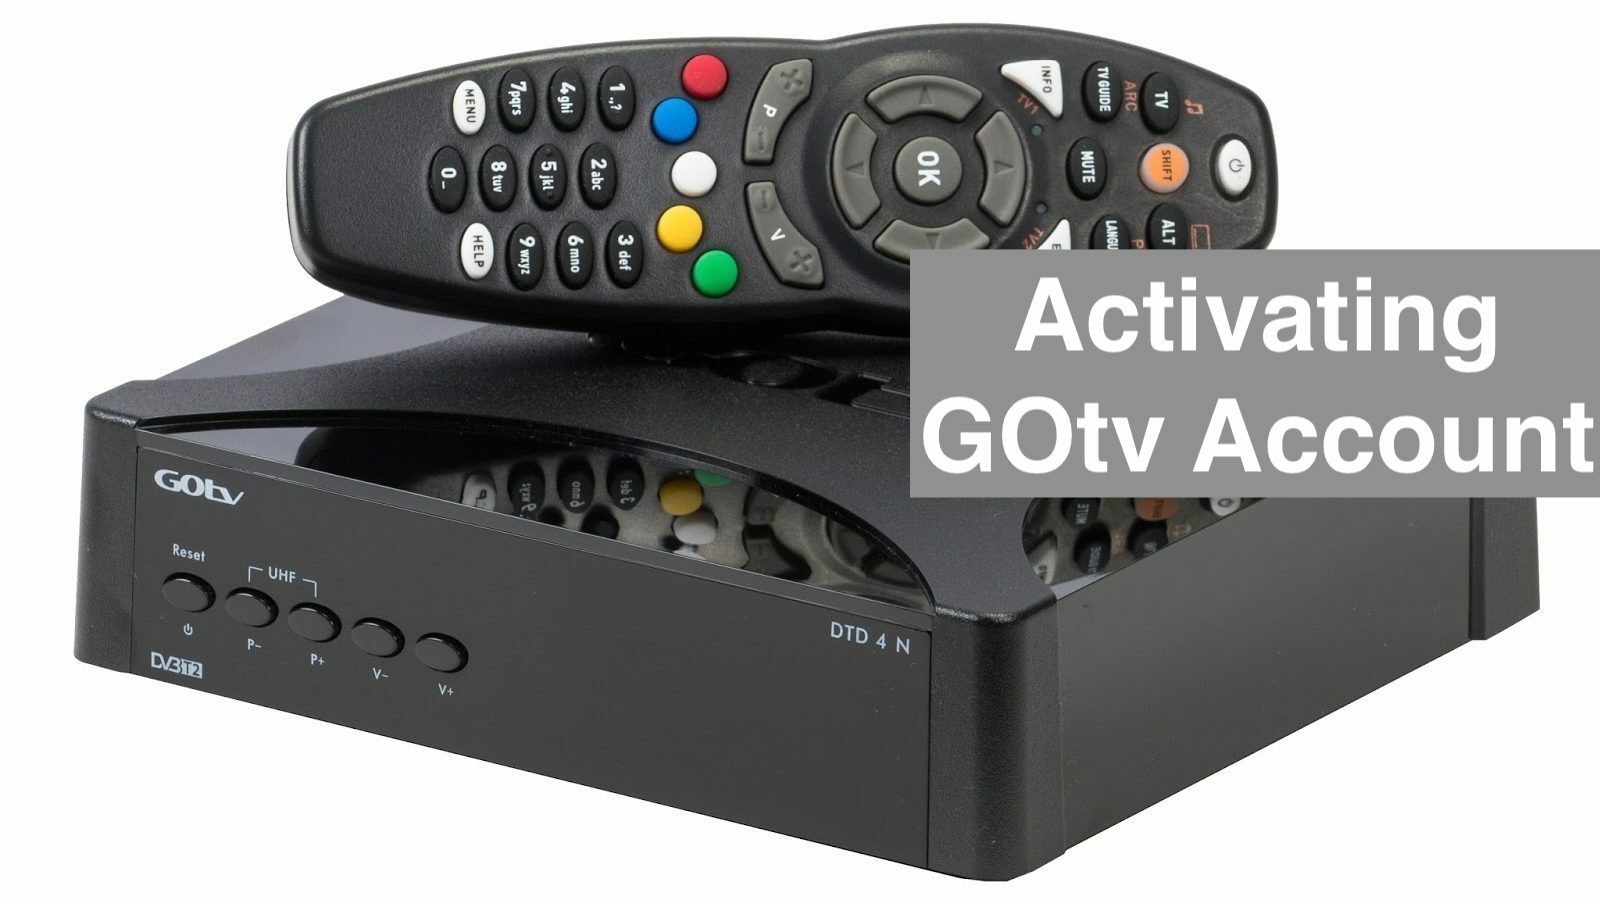 How to Activate Channel 29 On Gotv